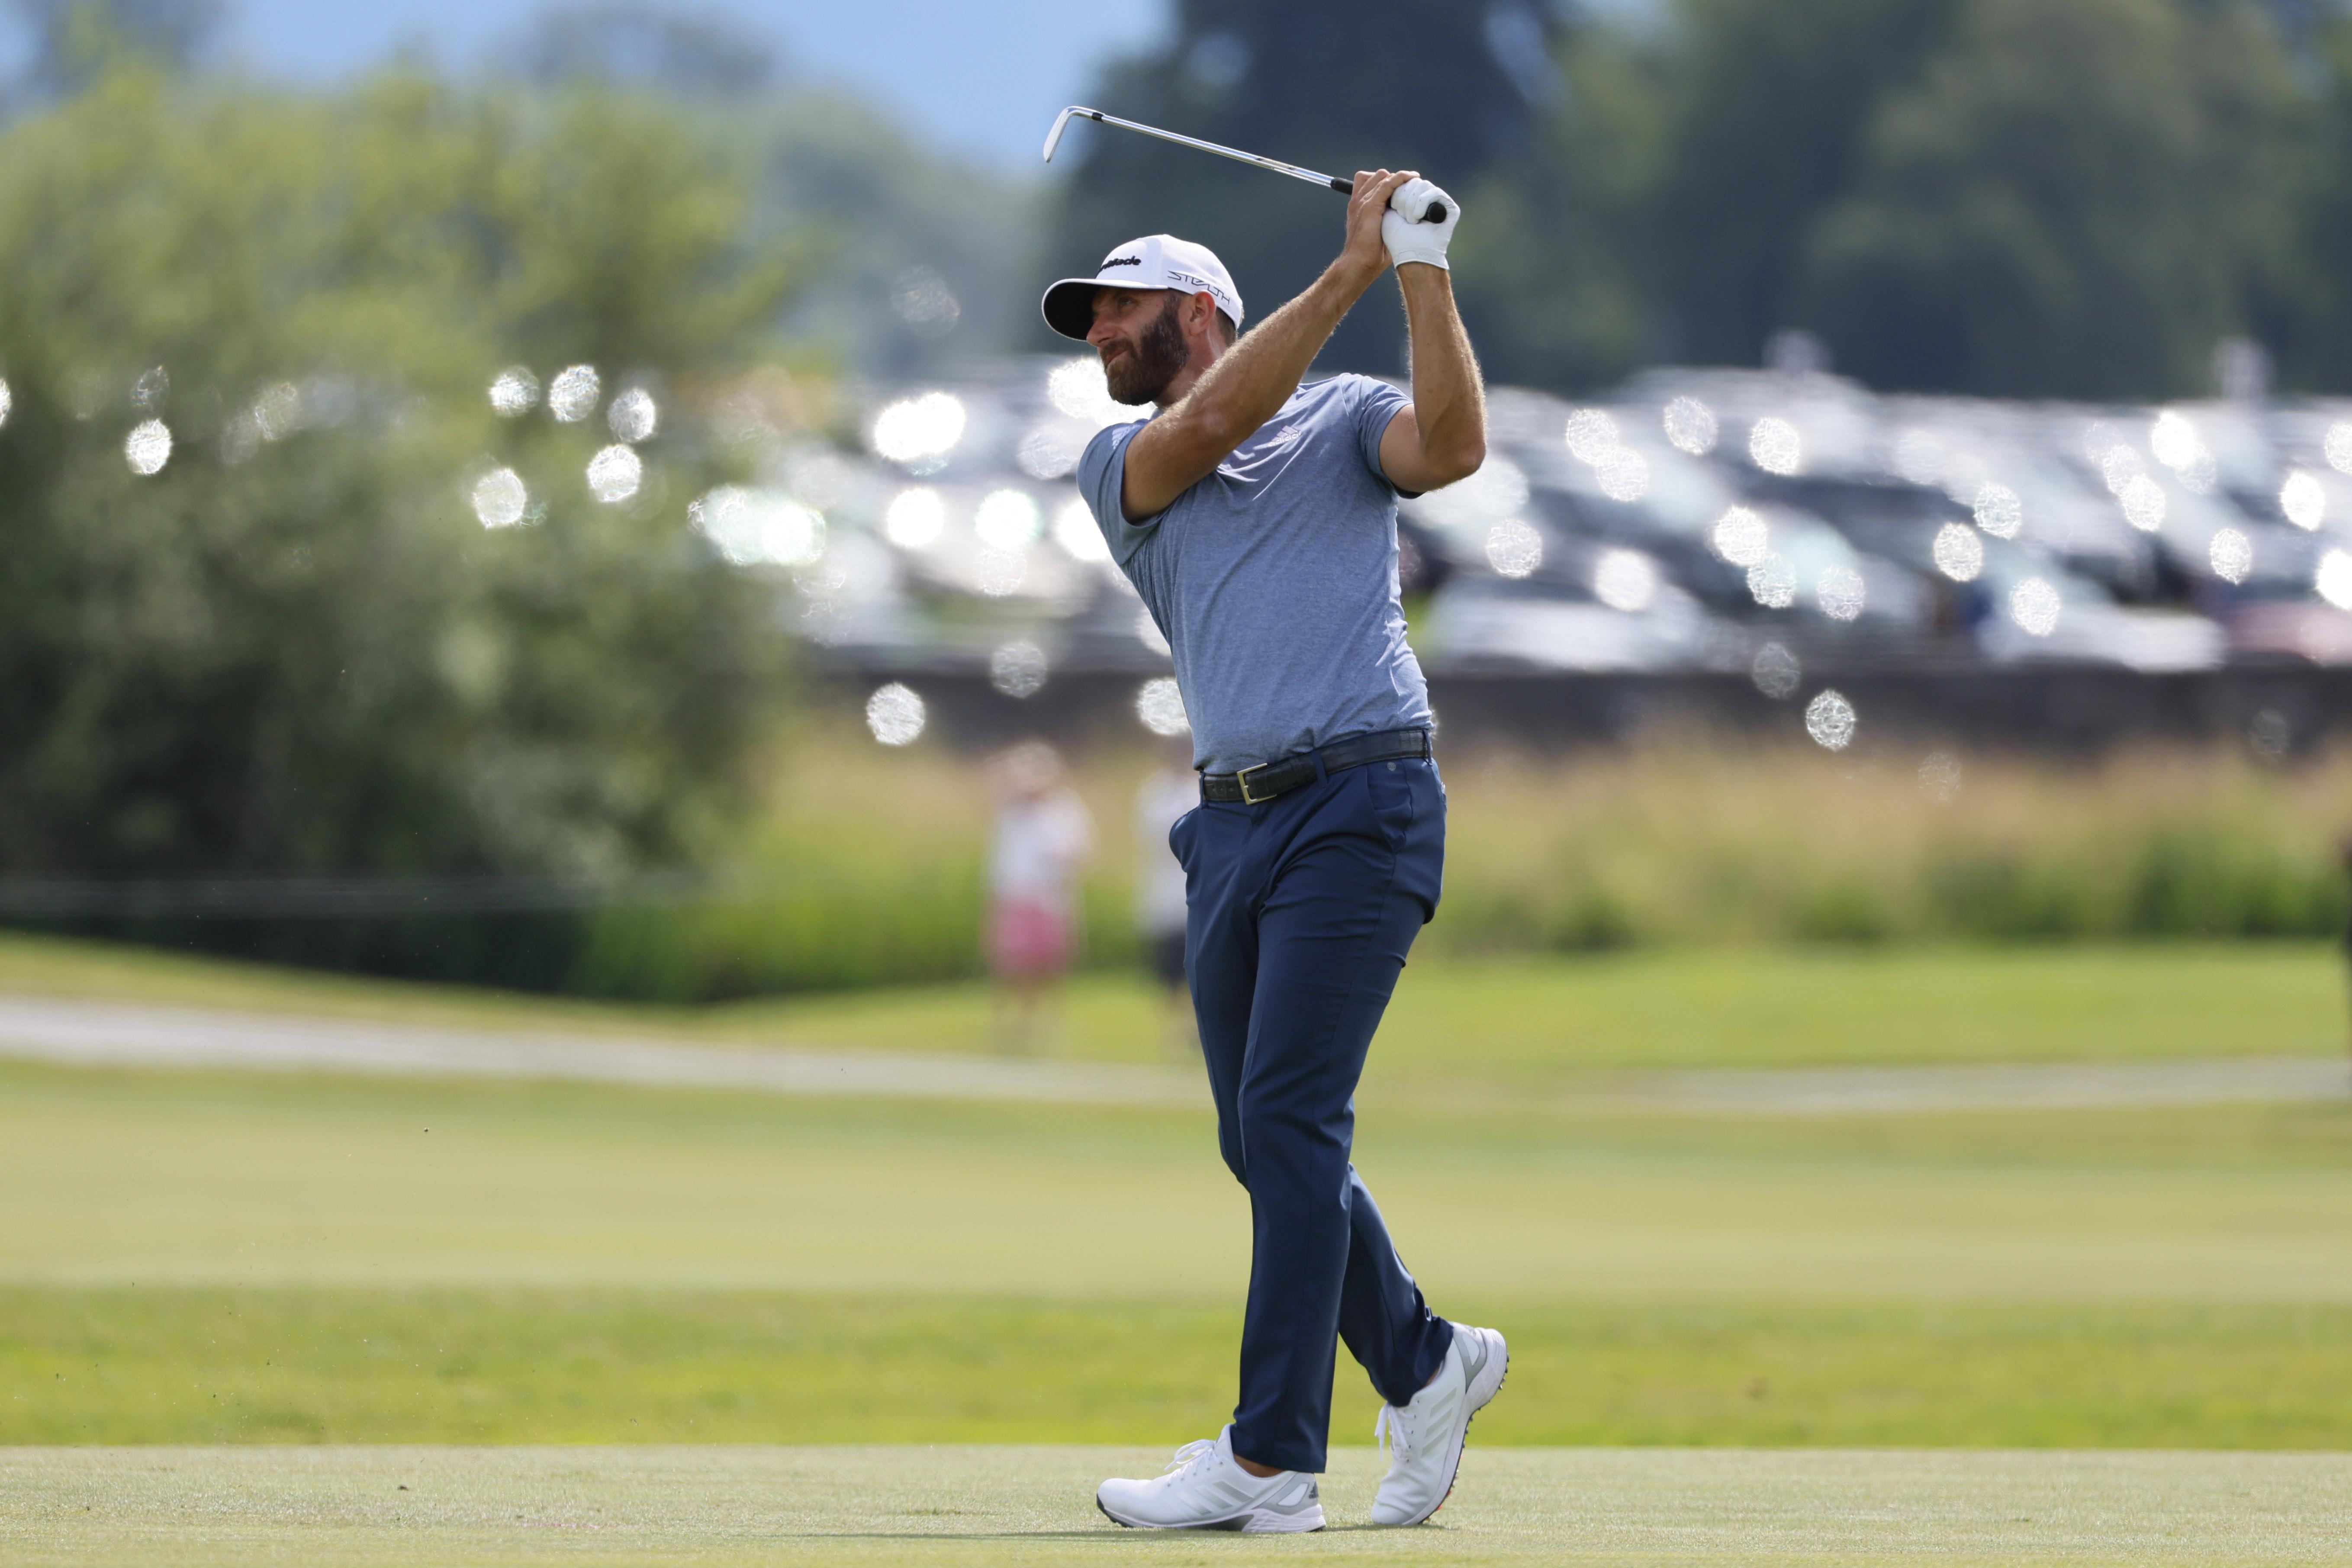 Dustin Johnson Open Championship 2022 Odds, History, Predictions & How to Watch